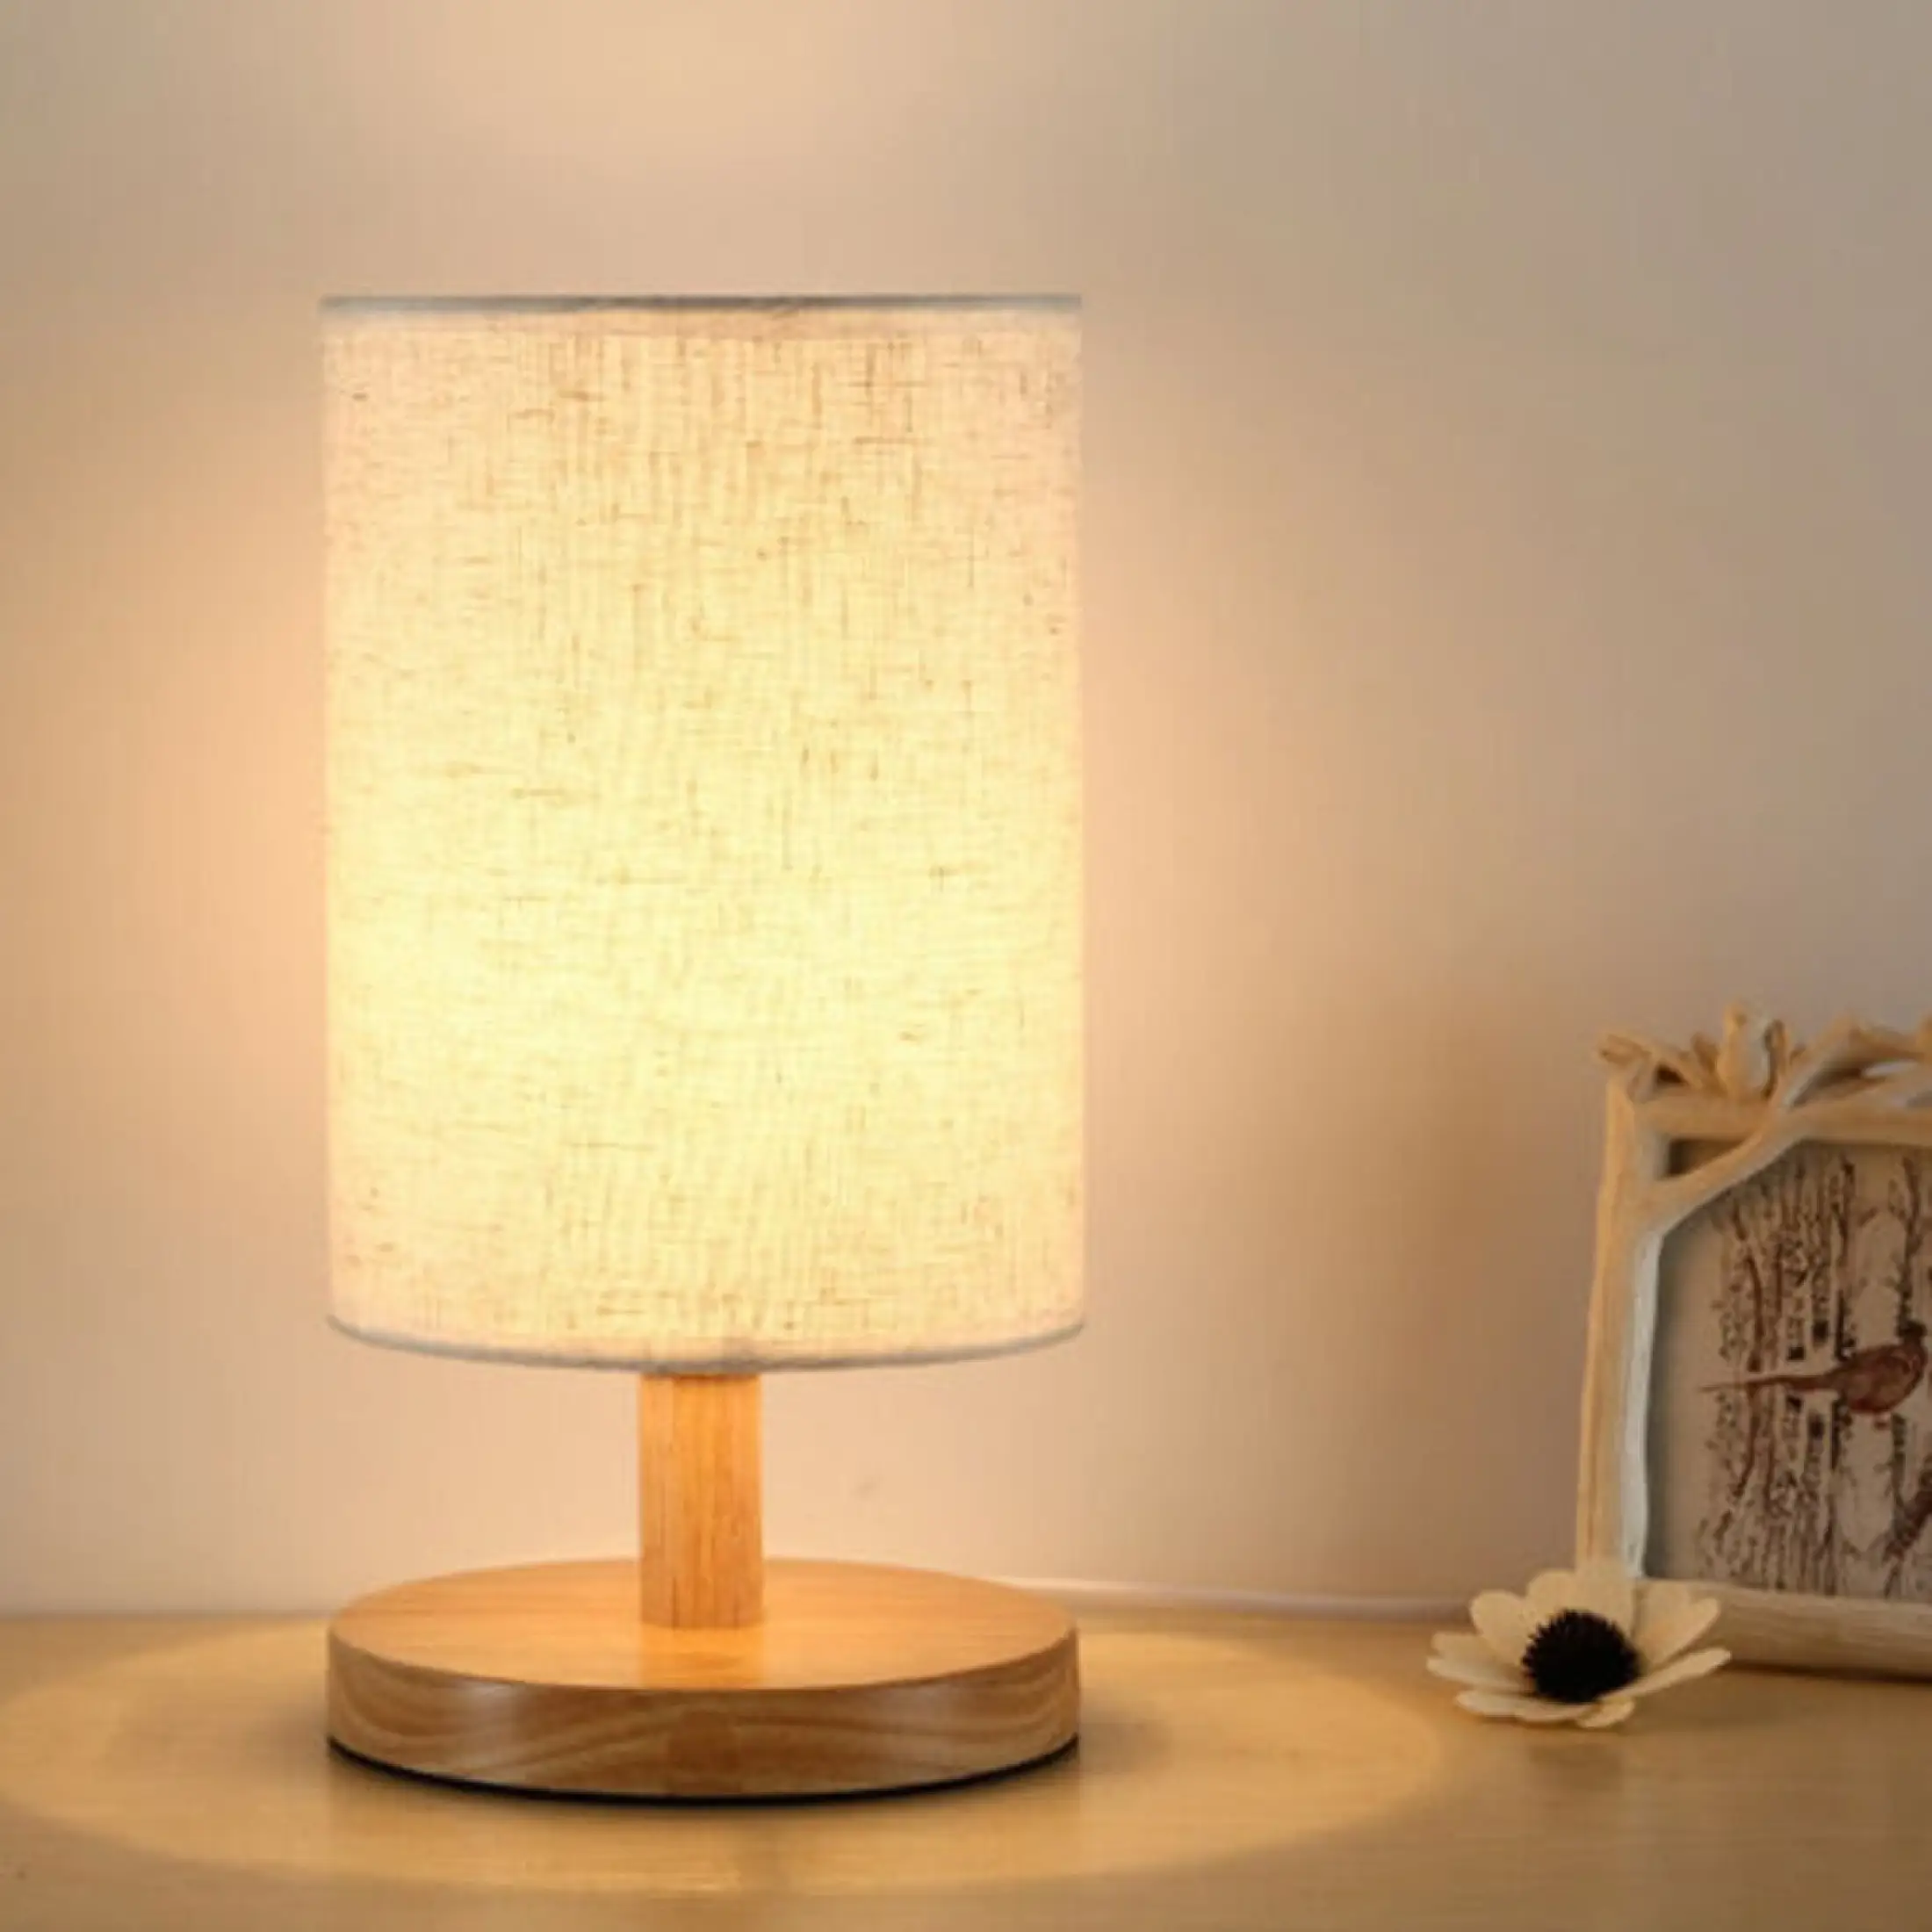 Bedside Lamp Night Led Light Warm White, How To Fix A Table Lamp Base